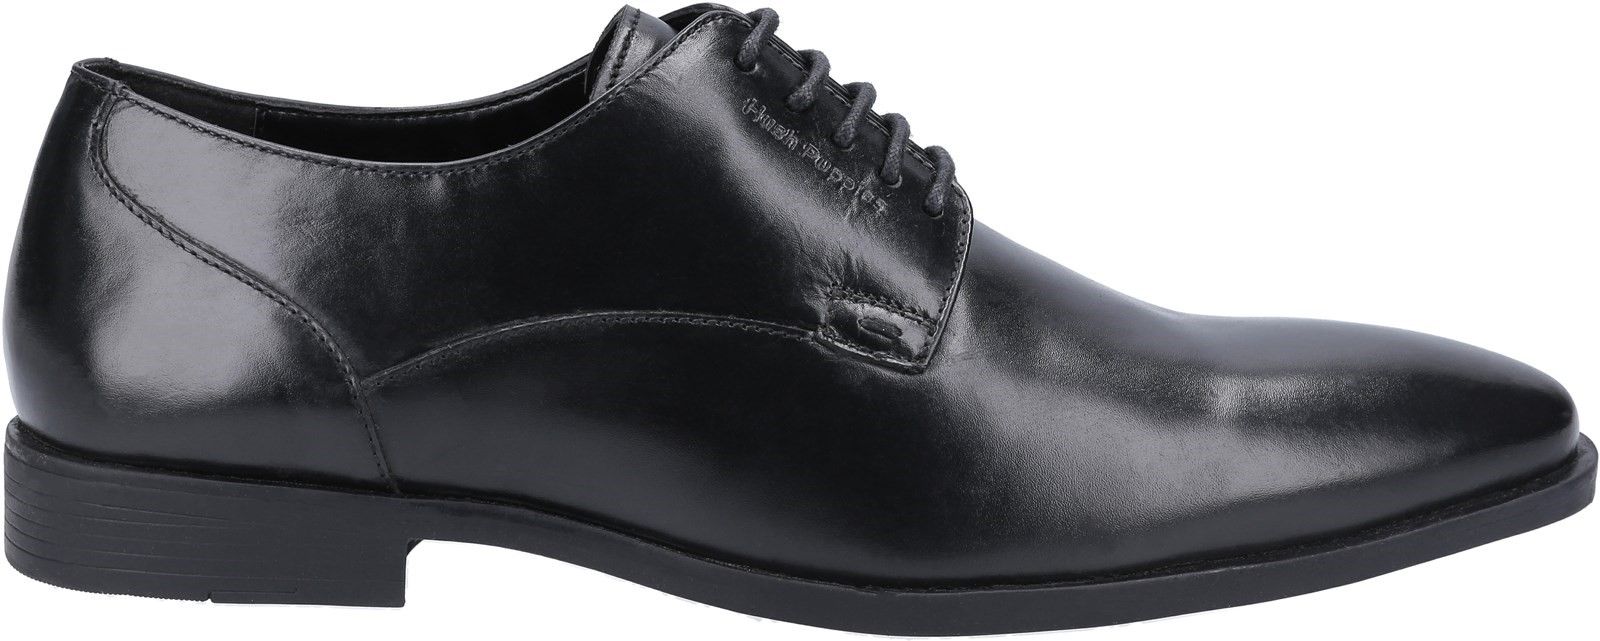 Ezra Plain Toe lace up shoe from Hush Puppies; Ezra is crafted with leather and has a memory foam footbed. The lightweight, flexible sole unit makes this the perfect smart footwear all day.Smart Leather Upper. 
Square toe. 
Hardwearing Rubber outsole. 
Memory Foam Sock. 
Lace Up Fastening.